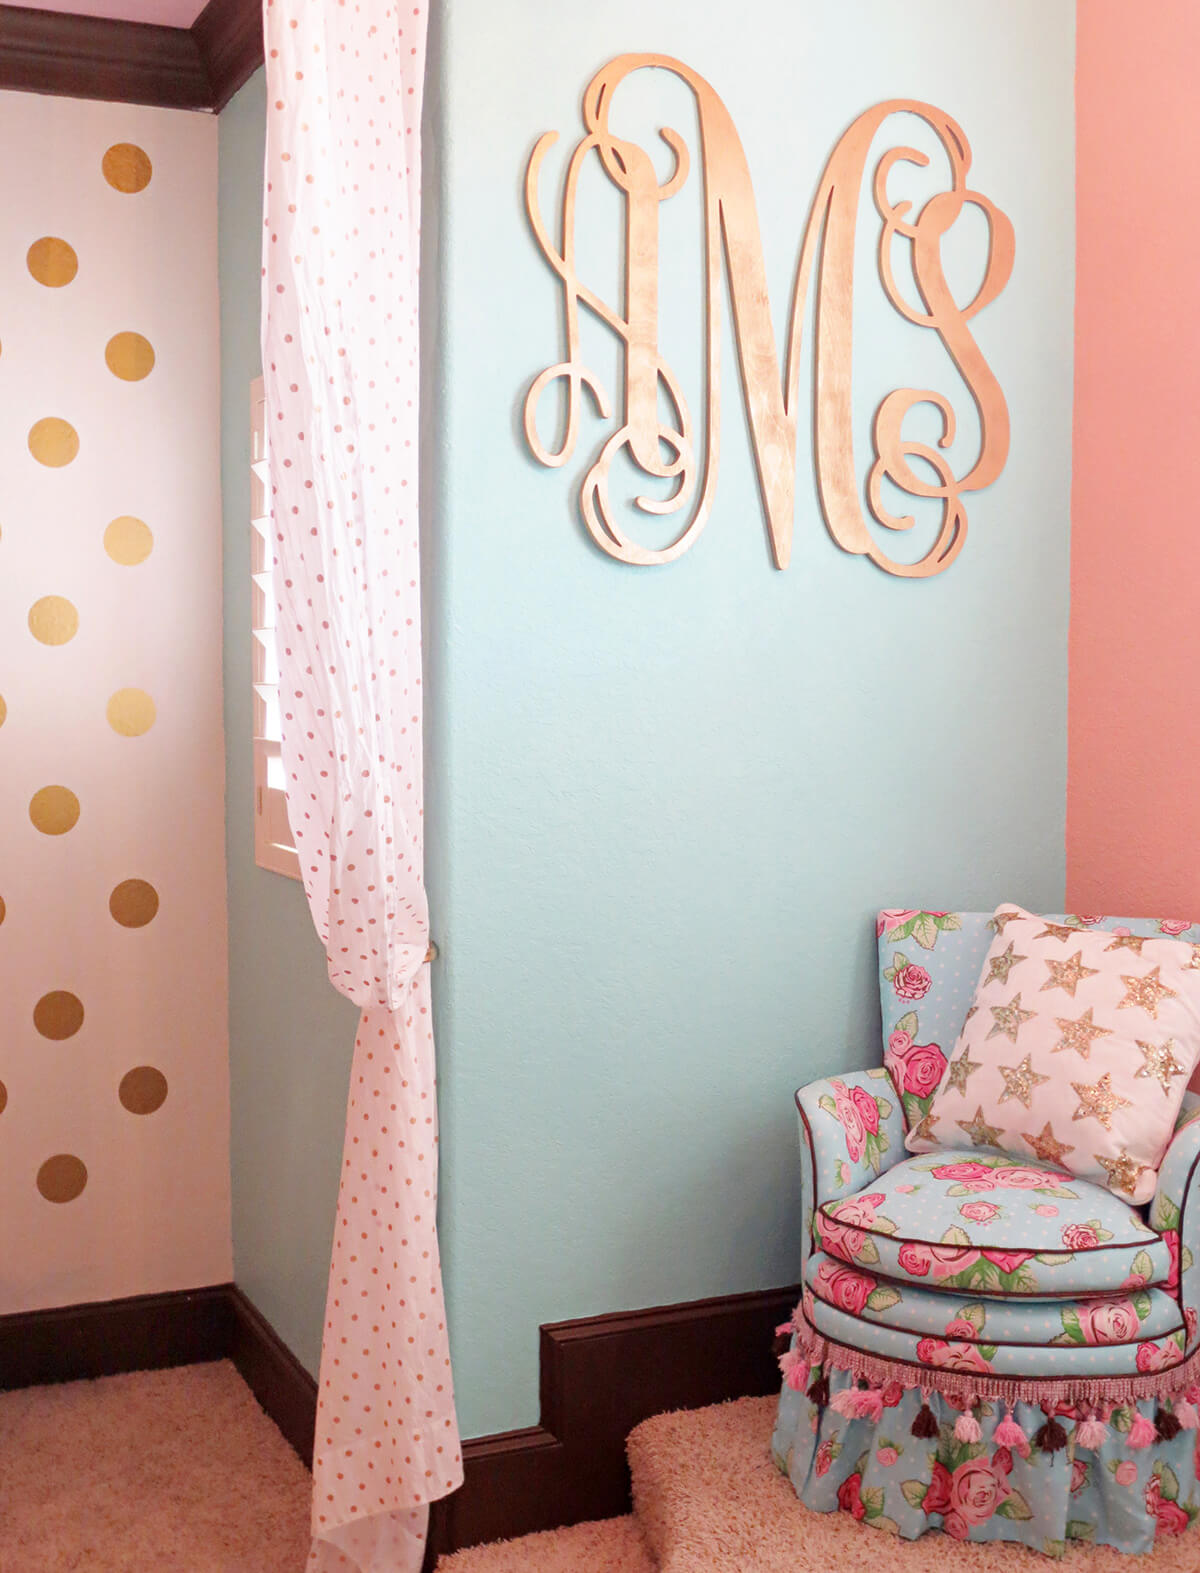 Shiny Pink Gold Monogram on the Wall